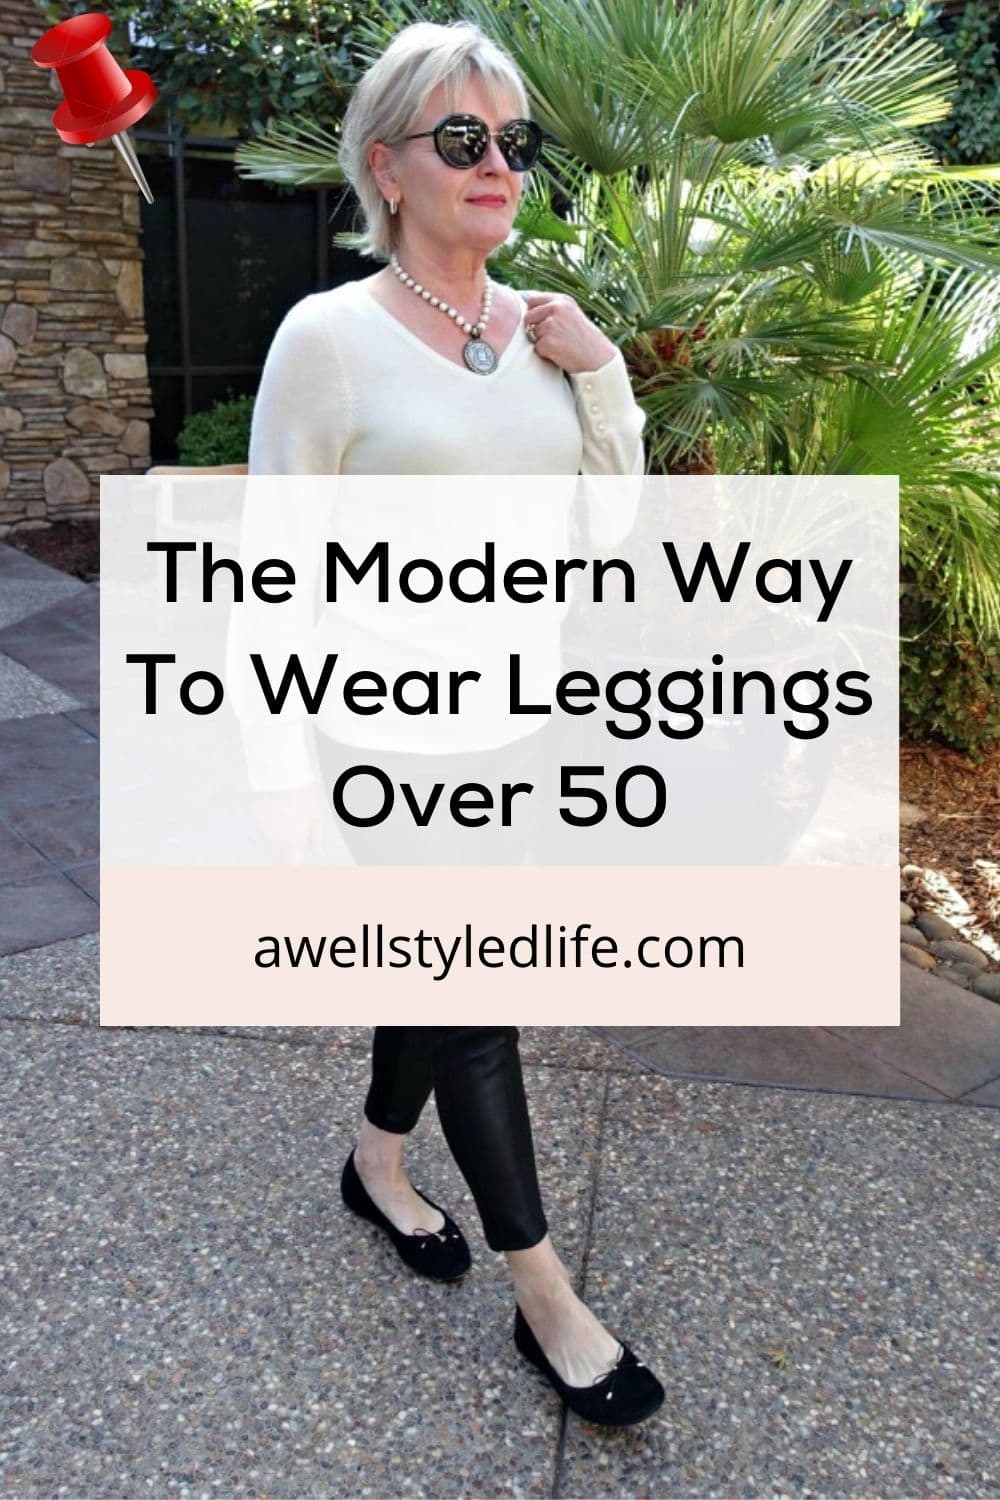 maskulinitet kaustisk Penge gummi How To Wear Leggings After Fifty - A Well Styled Life®